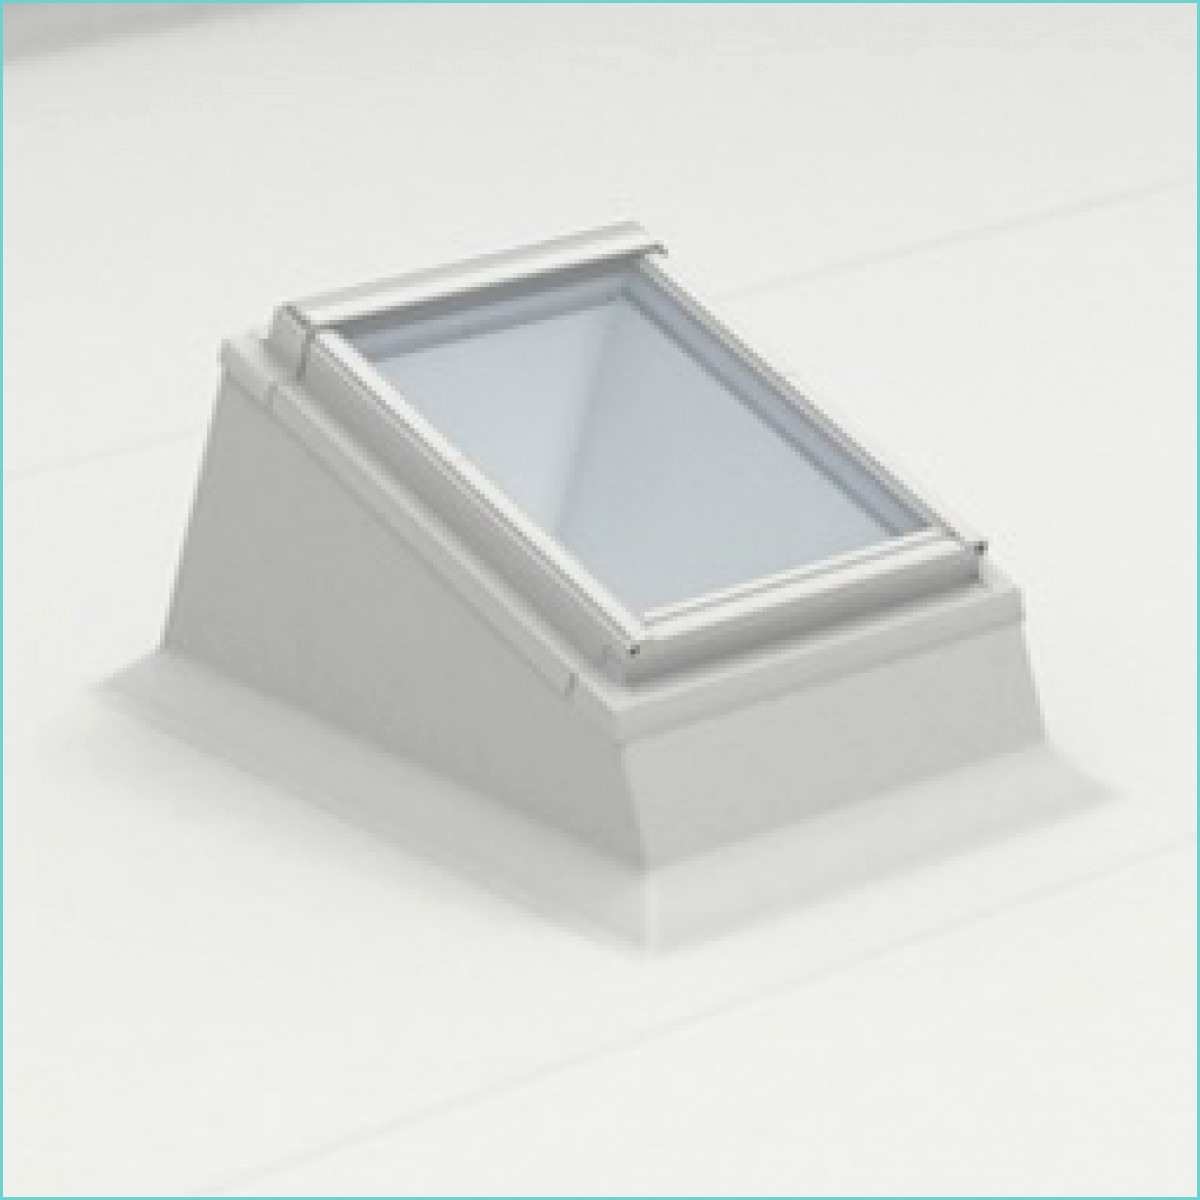 Flat Roof Windows Velux Velux Flat Roof Kerb for Use with Standard Roof Windows U